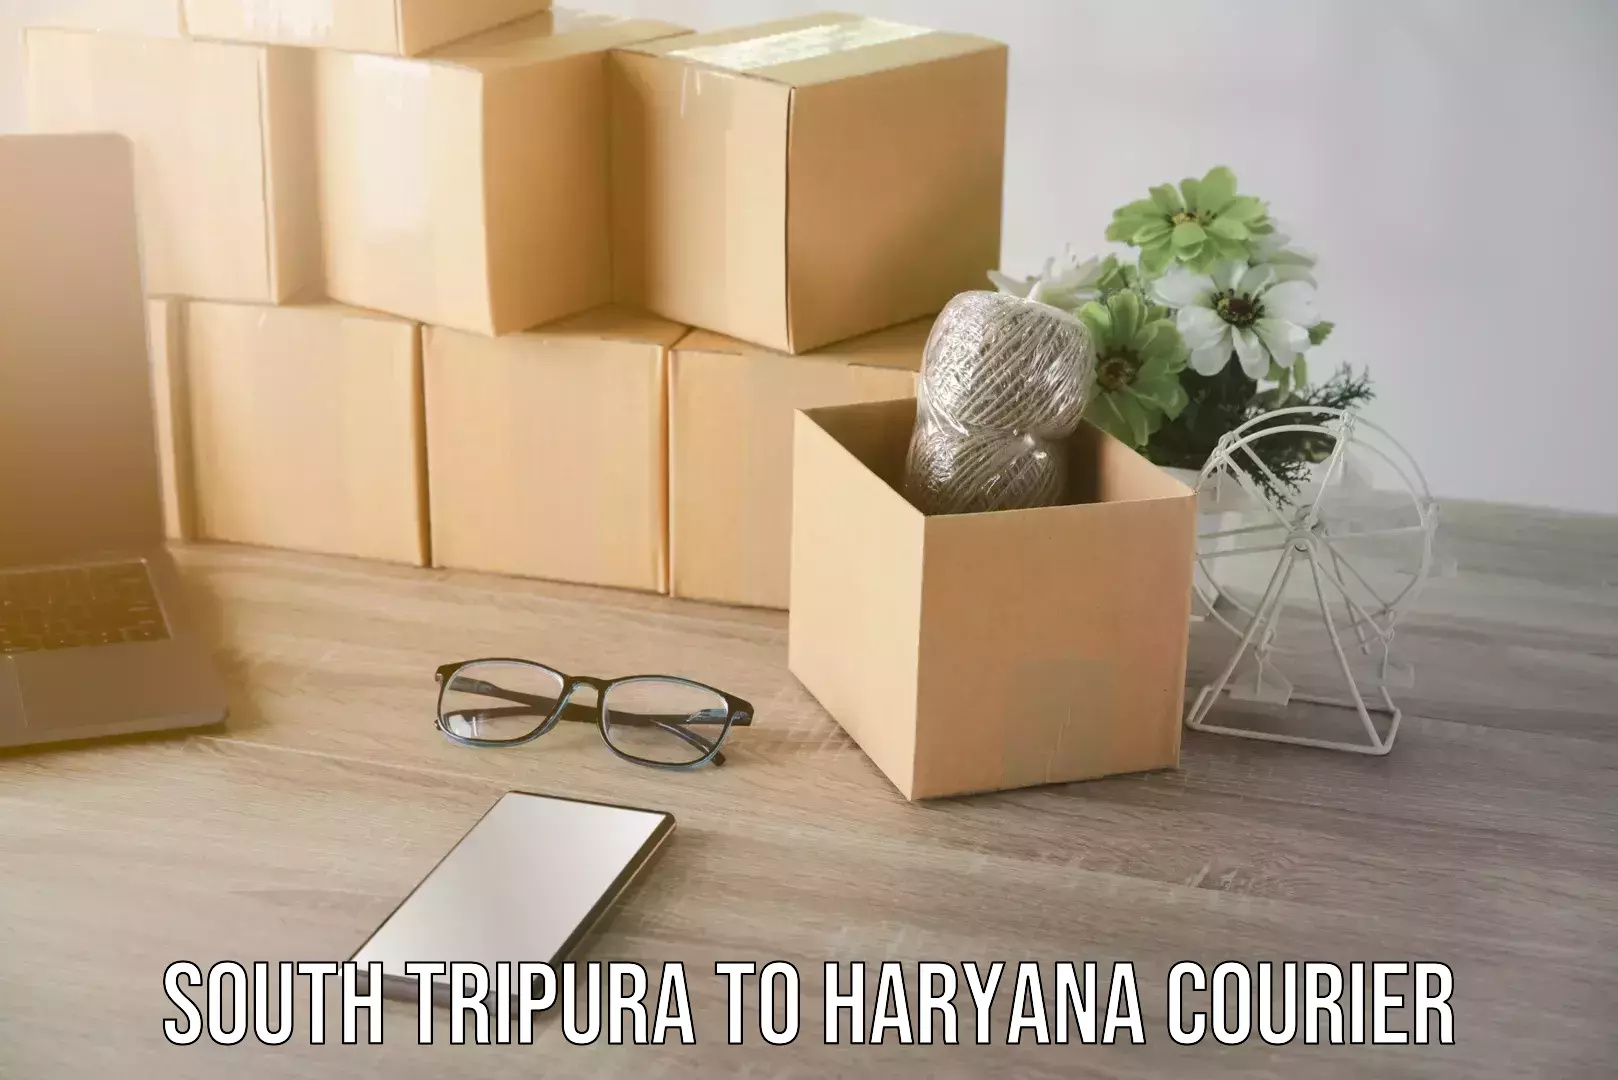 Express package services South Tripura to Haryana